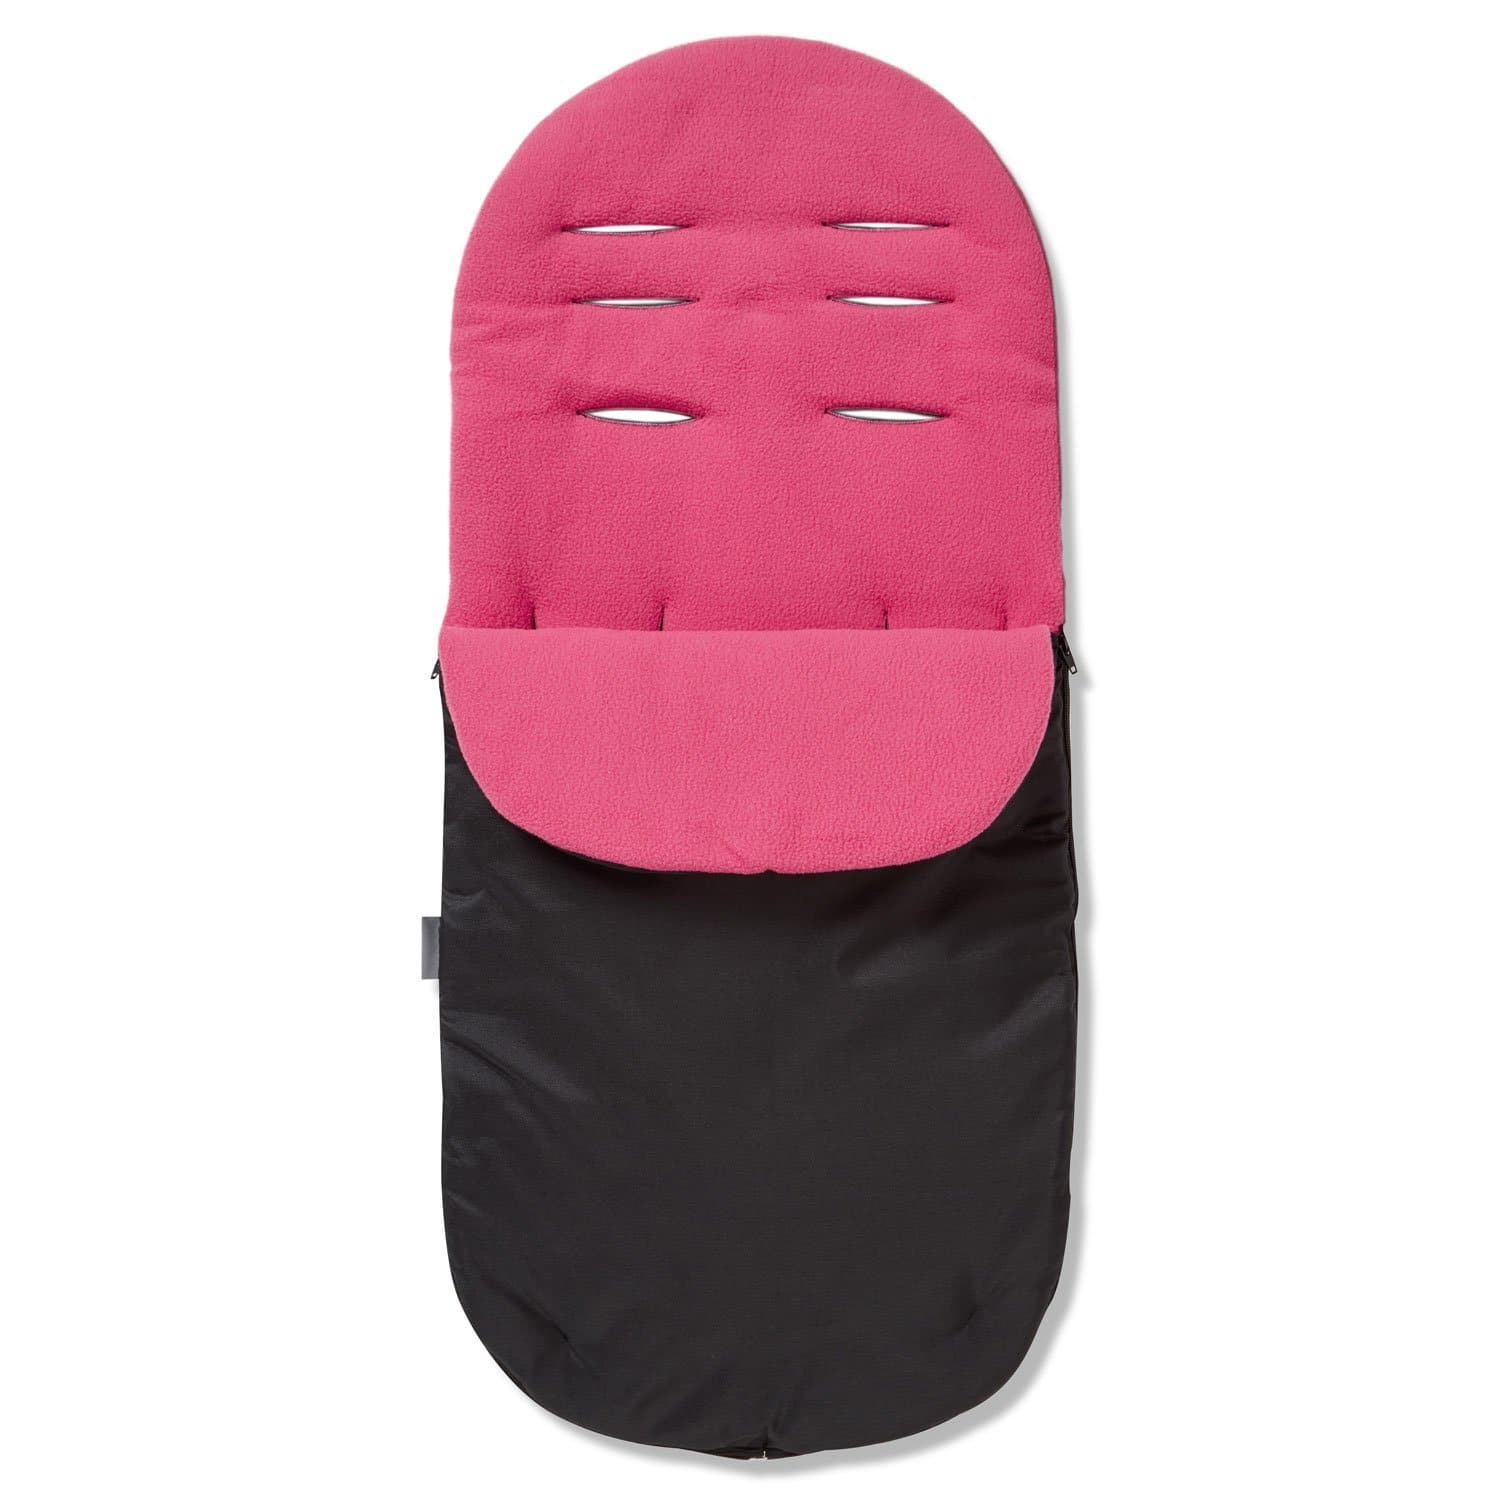 Footmuff / Cosy Toes Compatible with Kids Kargo - Dark Pink / Fits All Models | For Your Little One